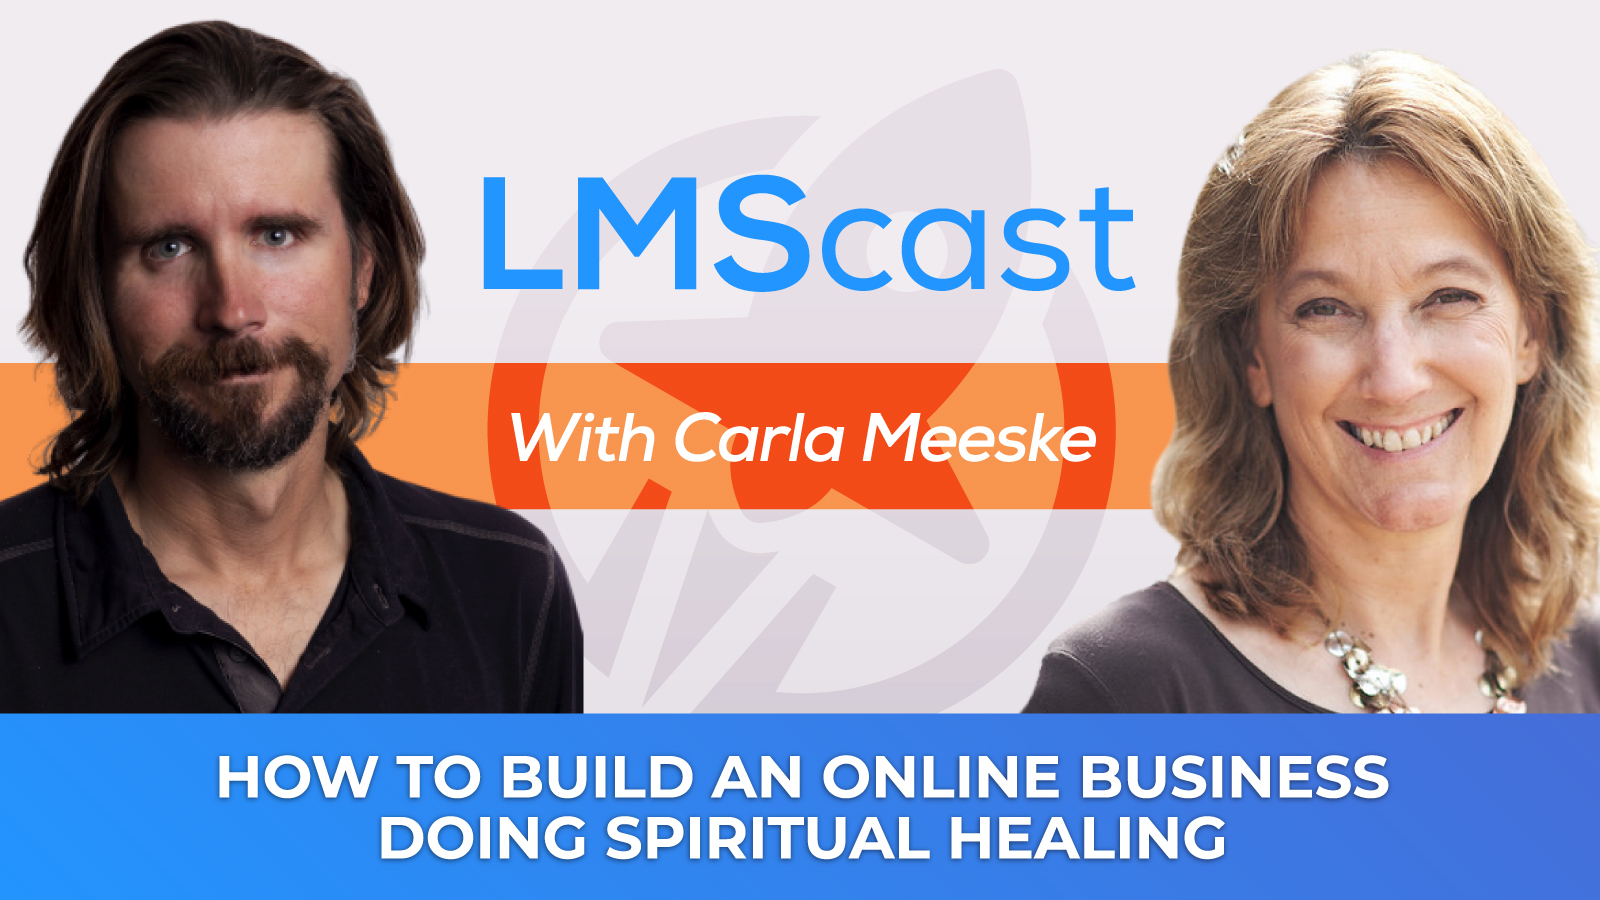 How to Build an Online Business Doing Spiritual Healing through the Internet with Shaman Carla Meeske